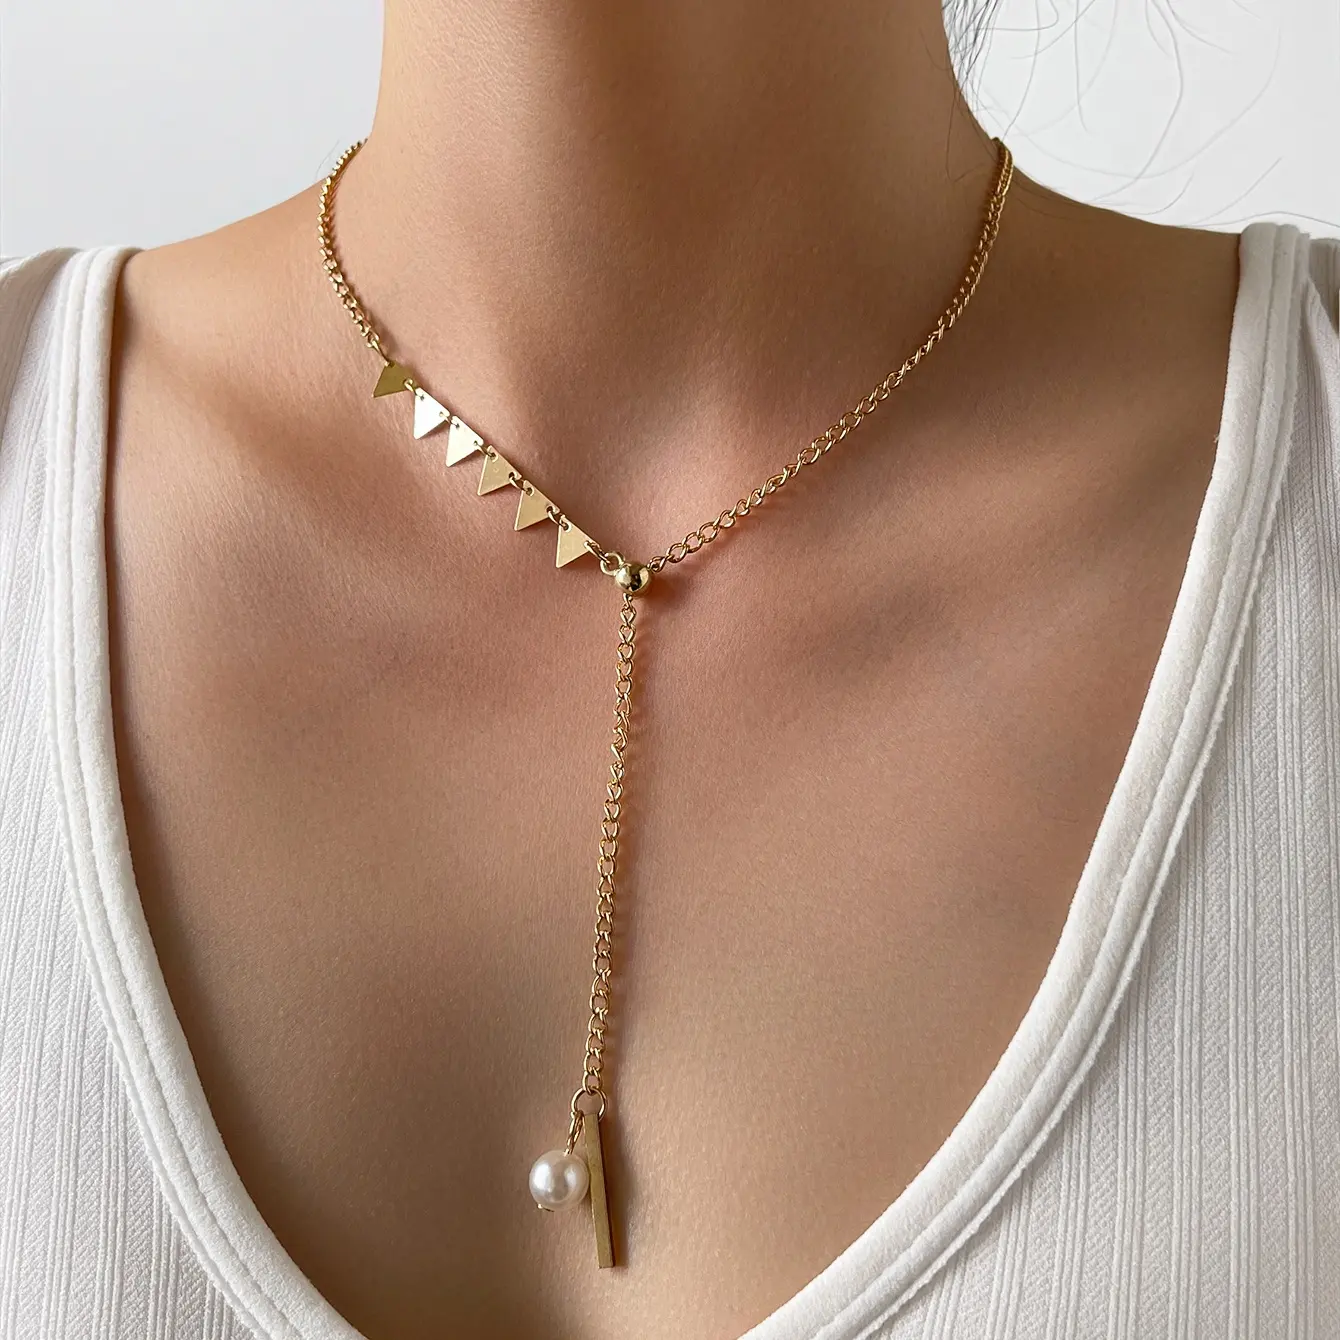 Sindlan Personalized Gold Long Pearl Pendant Necklace Vintage Luxury Women Jewelry Necklace